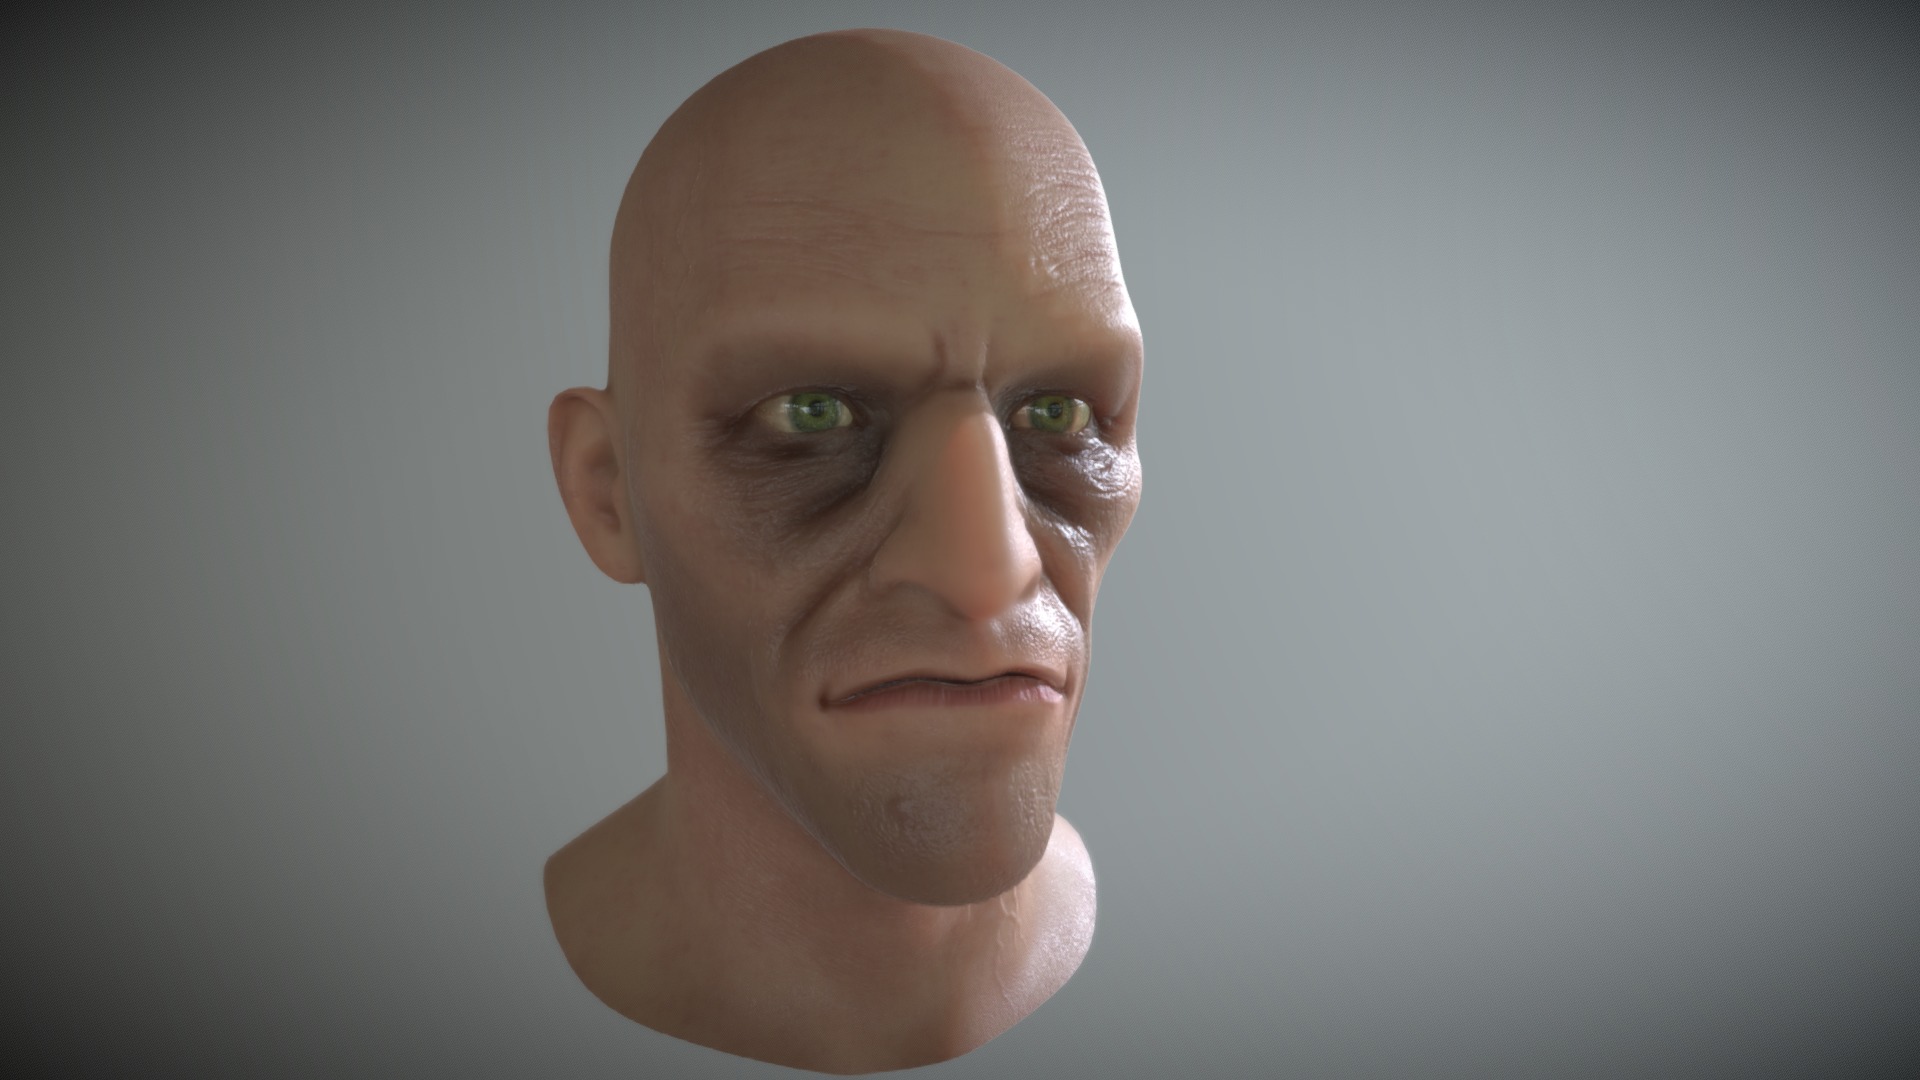 3D model Head Test - This is a 3D model of the Head Test. The 3D model is about a man's head with a white background.